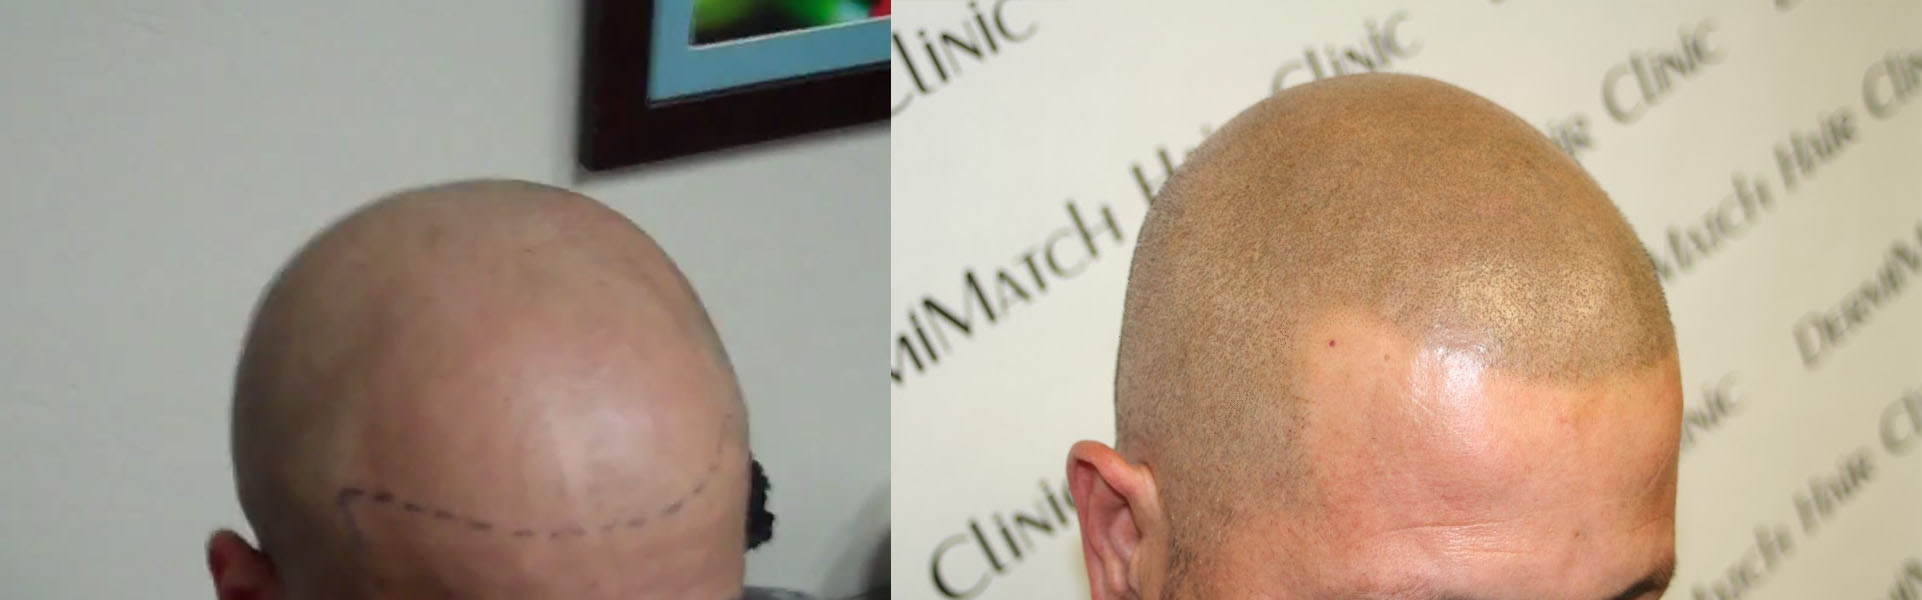 scalp micropigmentation SMP versus egg for hair growth